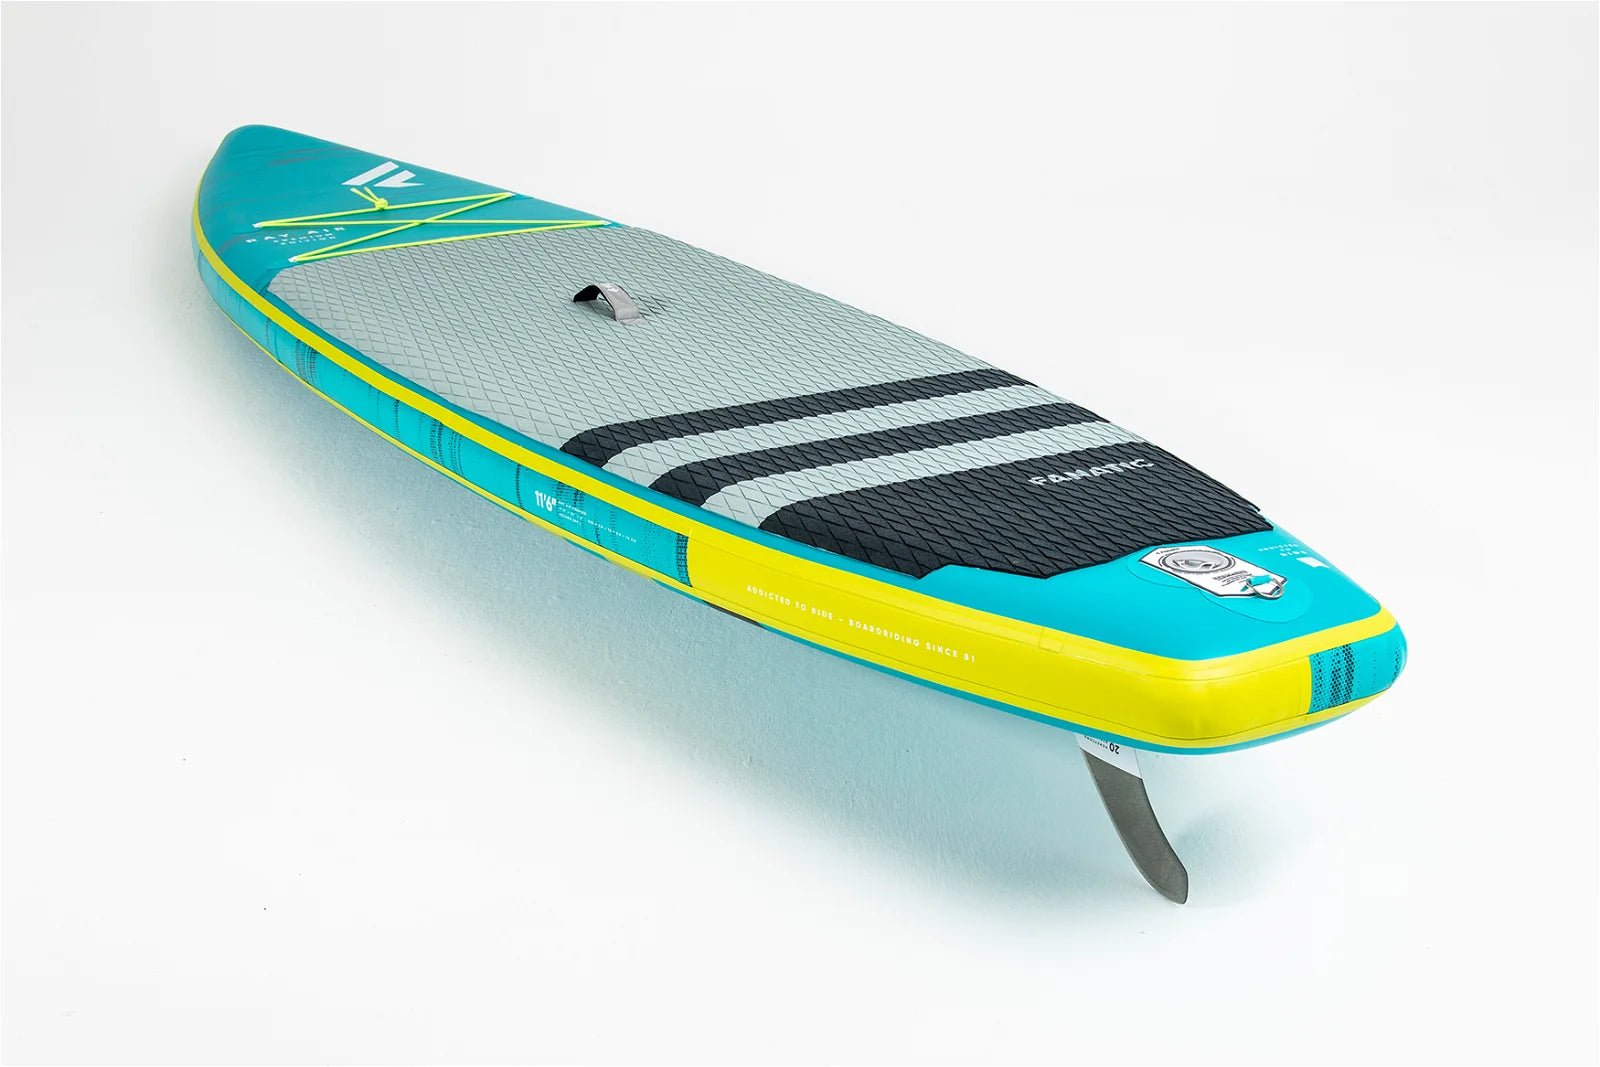 Fanatic Package Ray Air Premium/C35 2022 iSUP Paddleboard - Worthing Watersports - 9008415938483 - iSUP Packages - Fanatic SUP